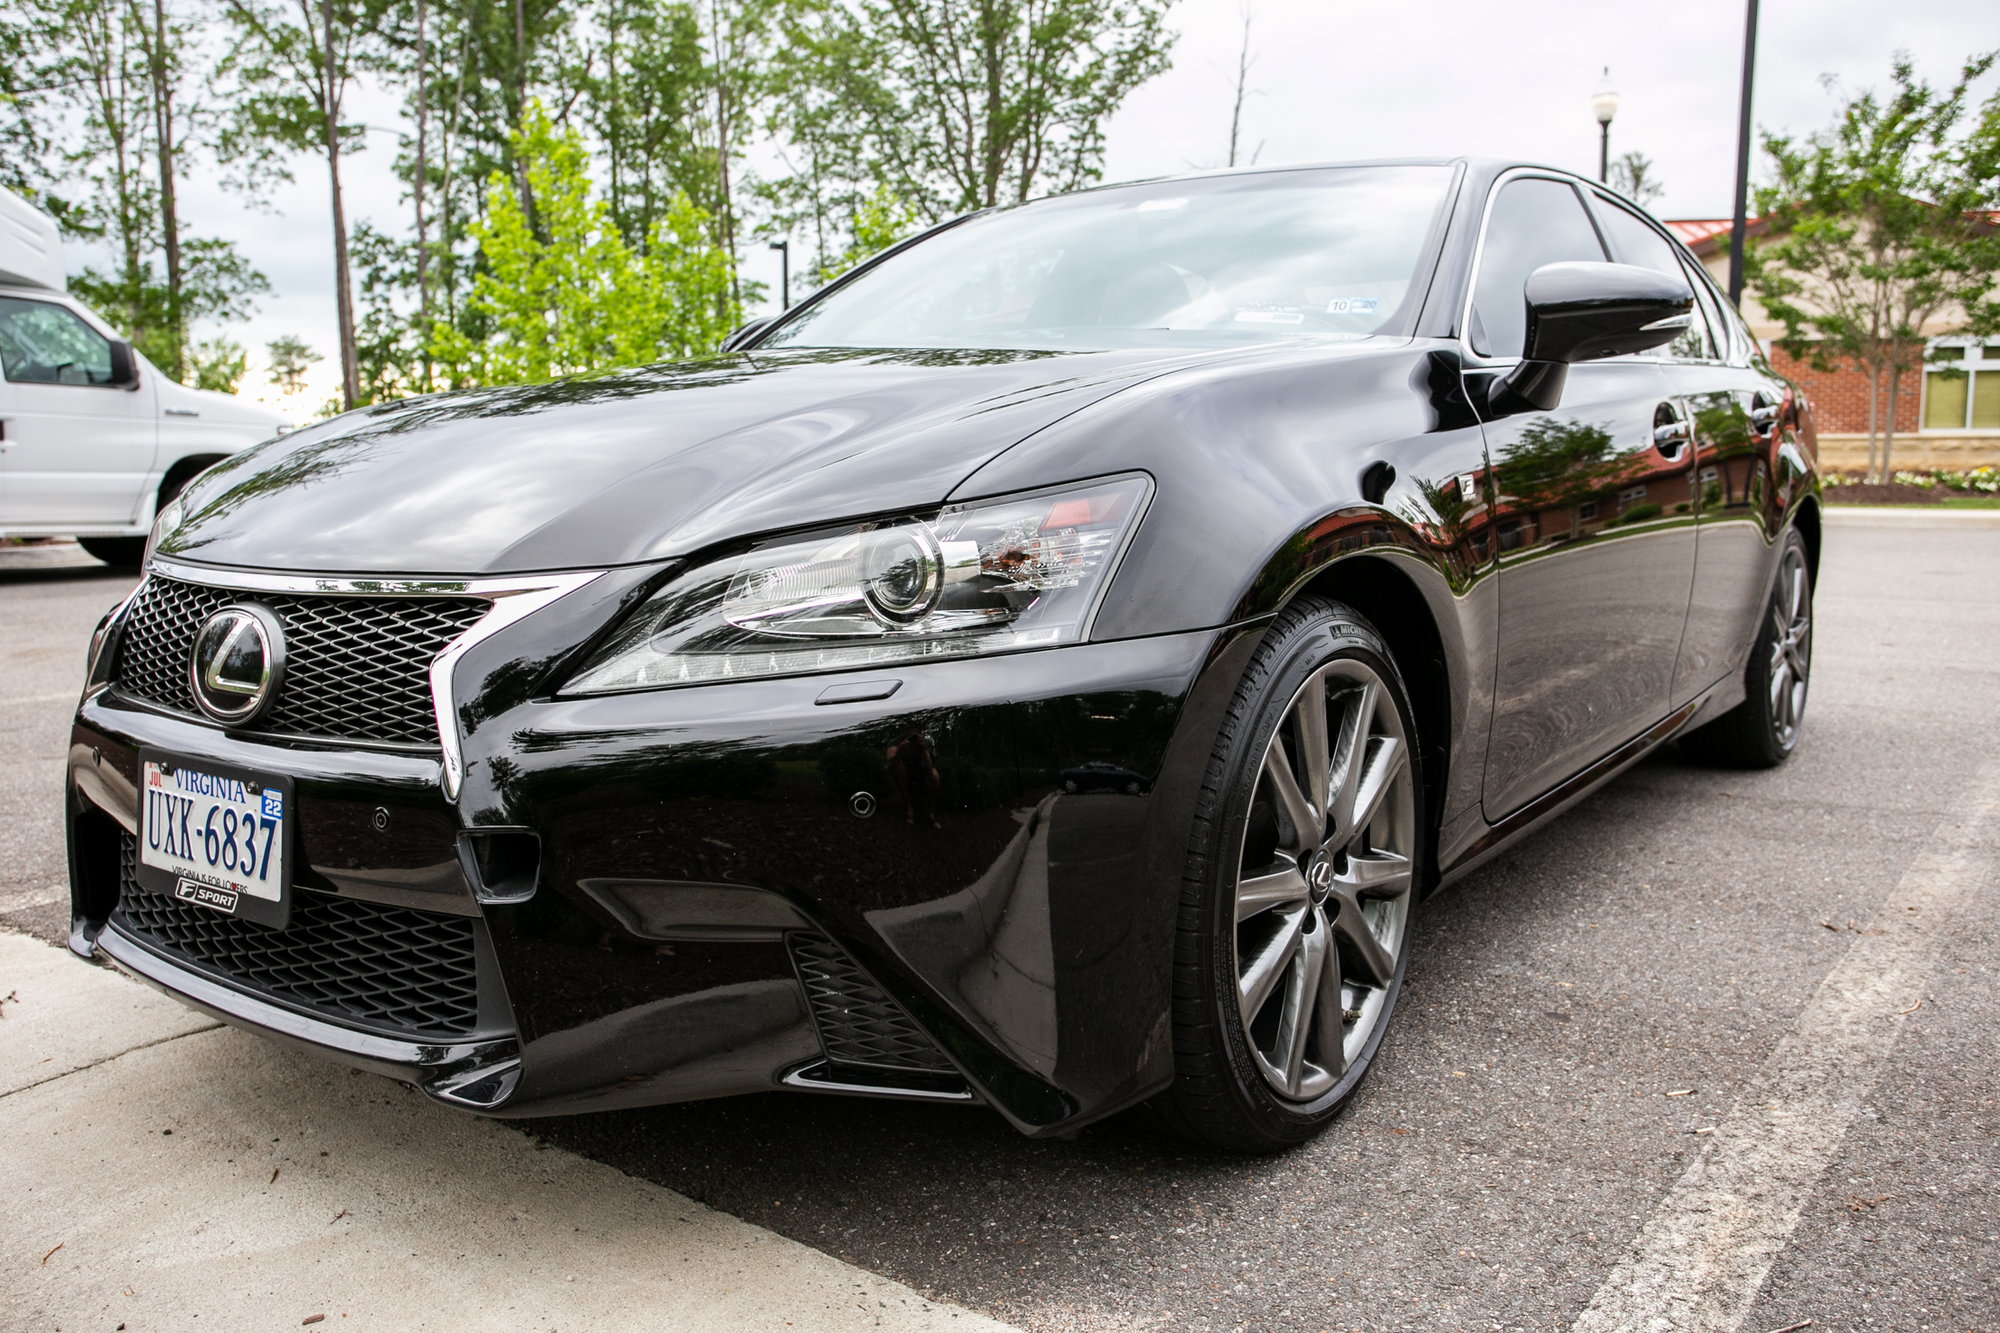 2013 Lexus GS350 - 2013 GS 350 F-Sport AWD w/ Cold Weather Package - Used - VIN JTHCE1BL1D5017859 - 72,250 Miles - 6 cyl - AWD - Automatic - Sedan - Black - Richmond, VA 23112, United States